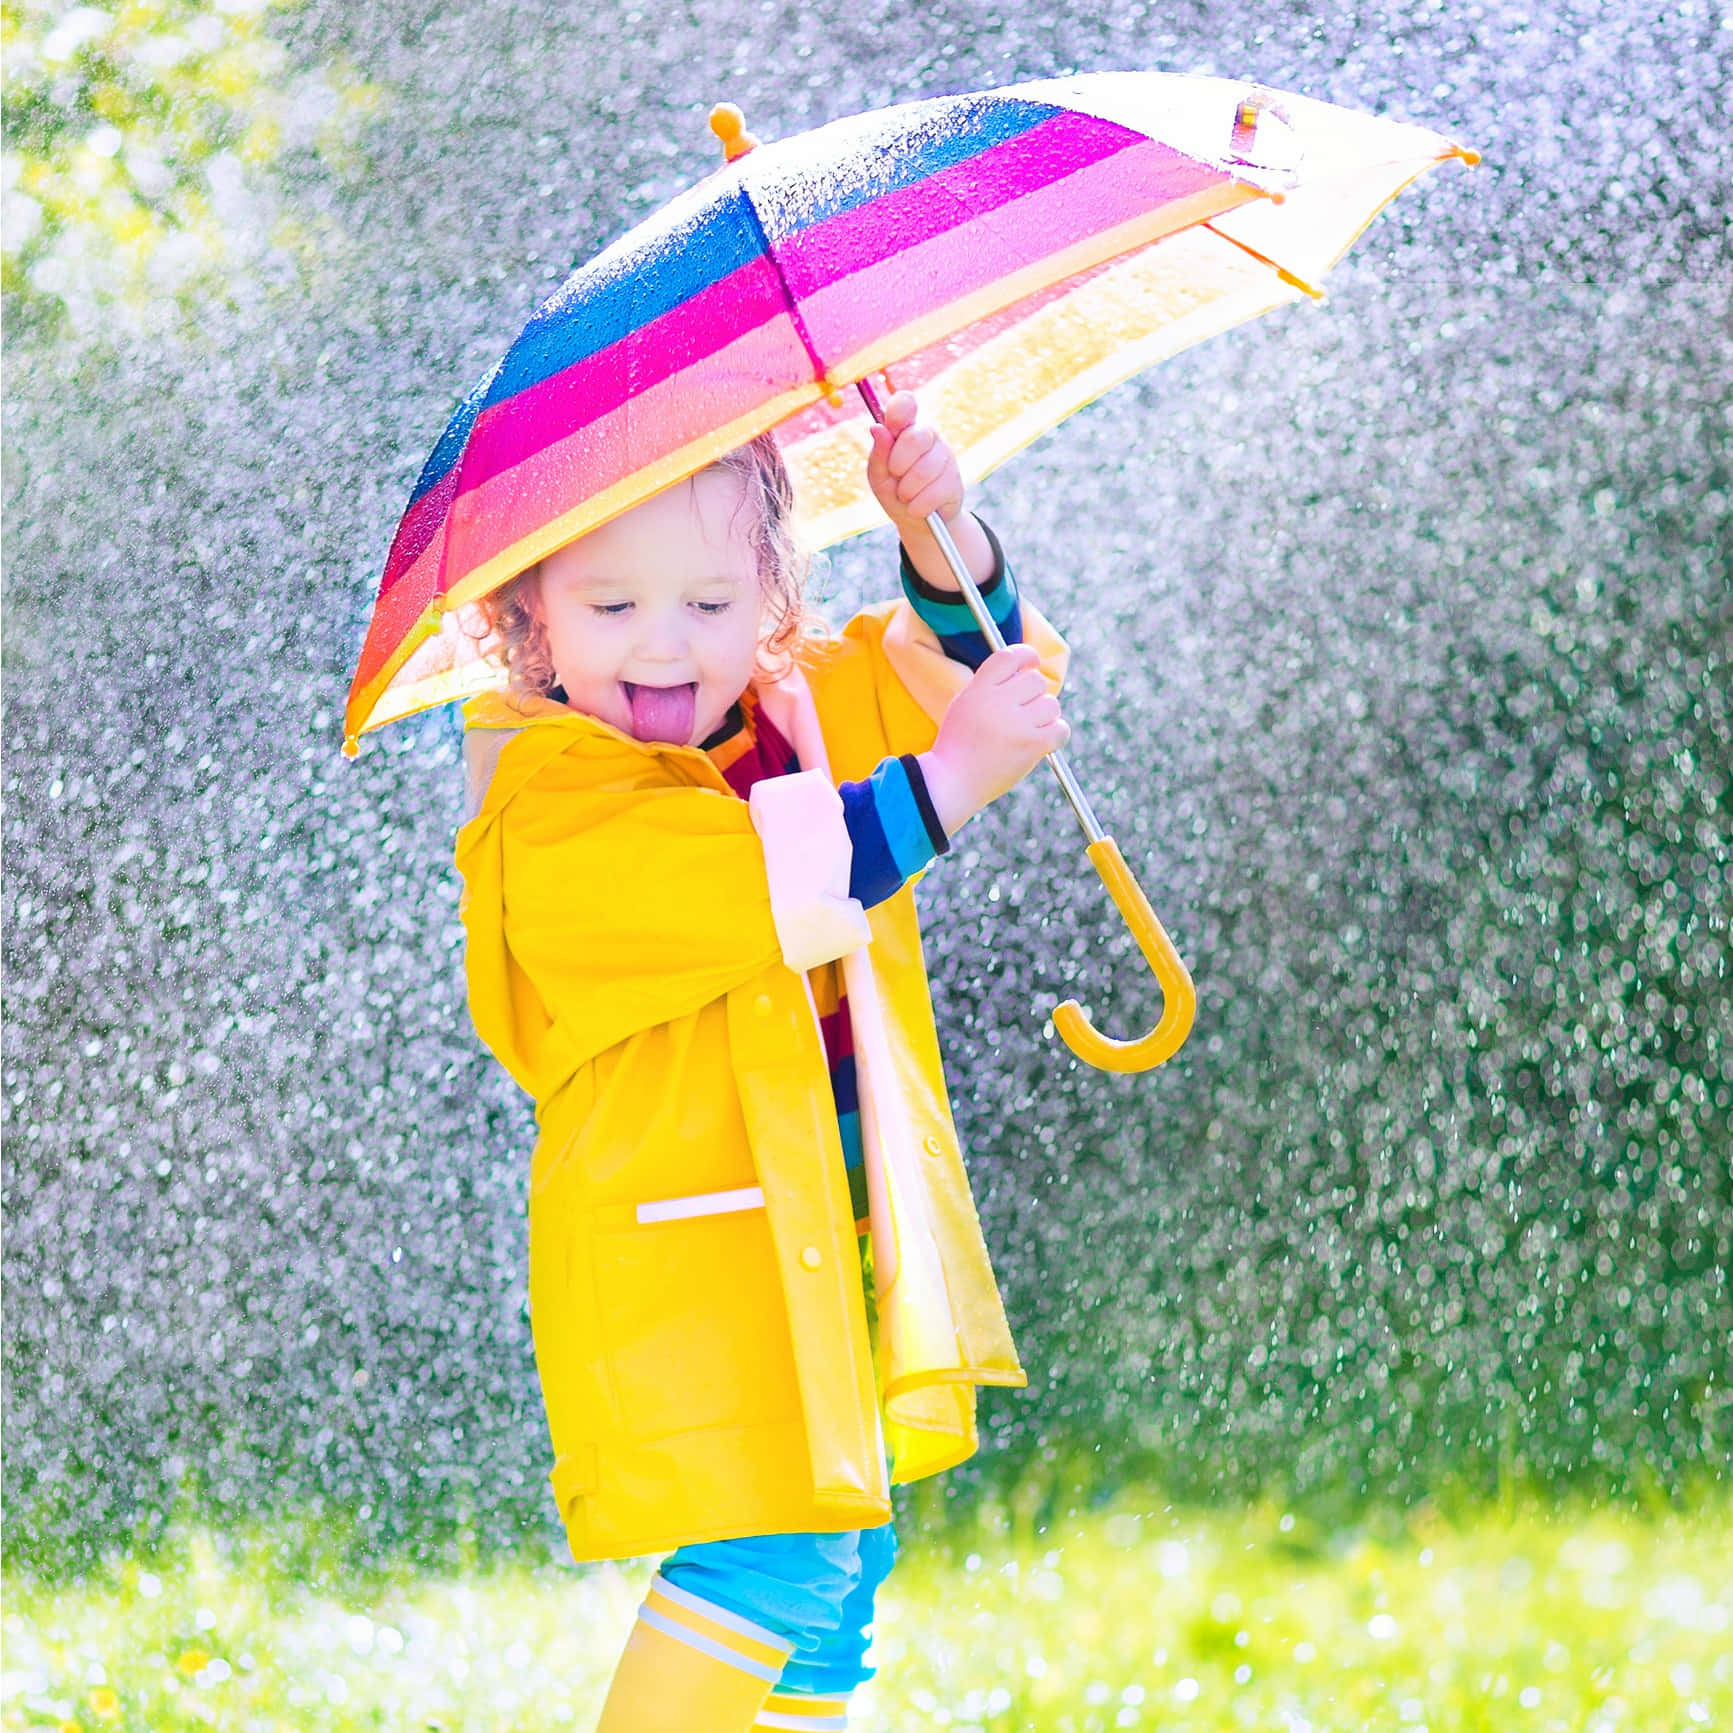 Happy Little Girl With Umbrella On Rainy Day Picture